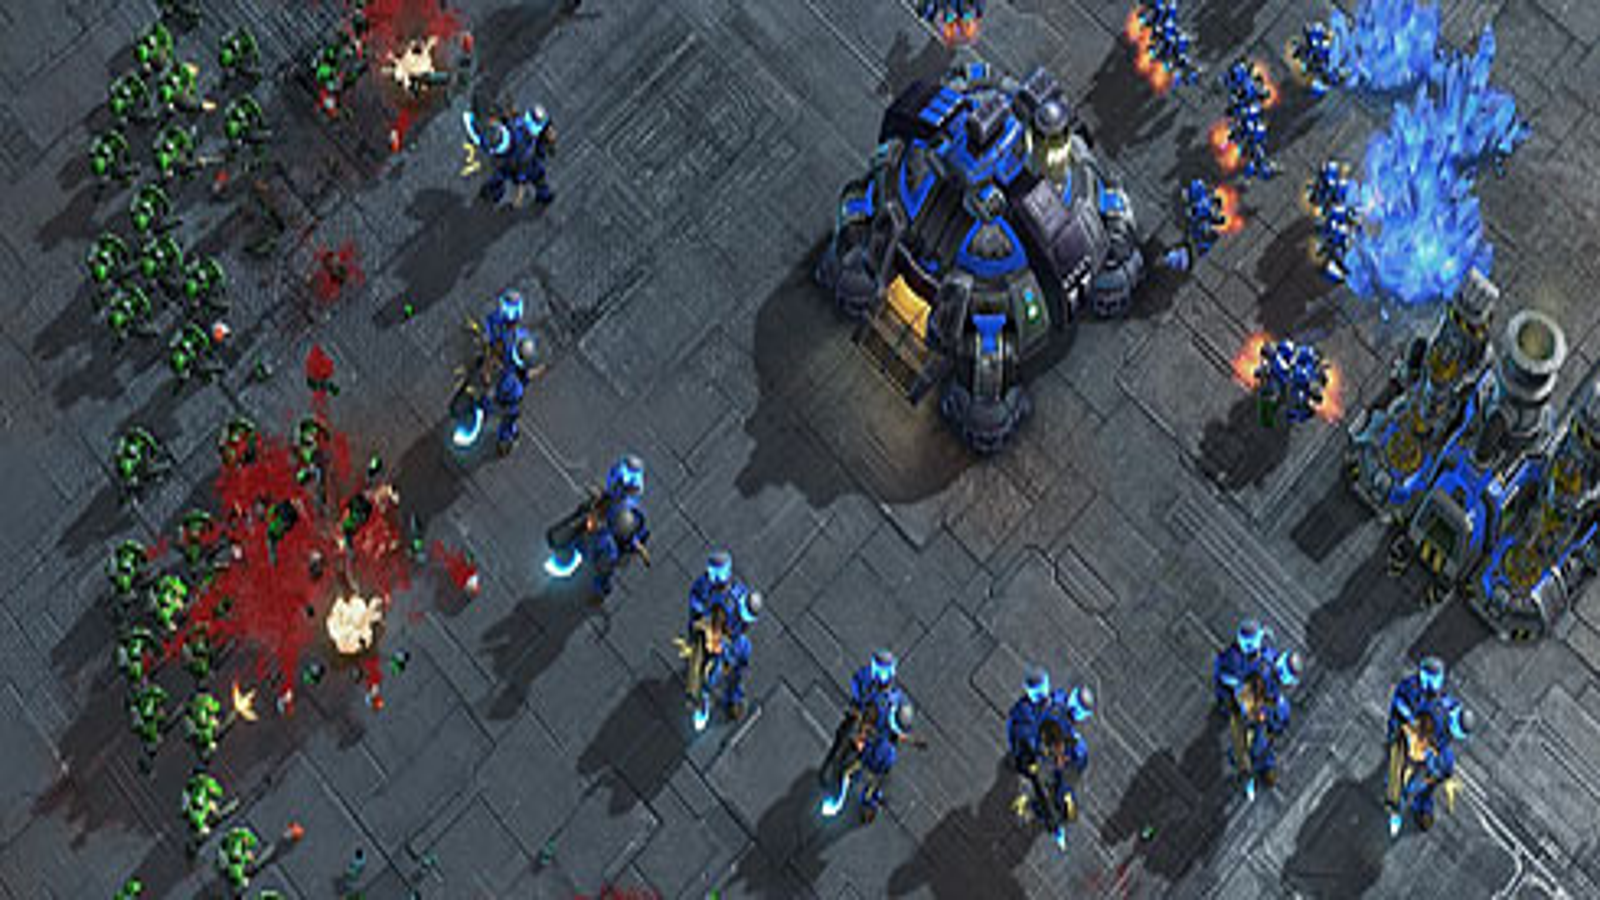 Get Ready for Starcraft 3: What's Coming!